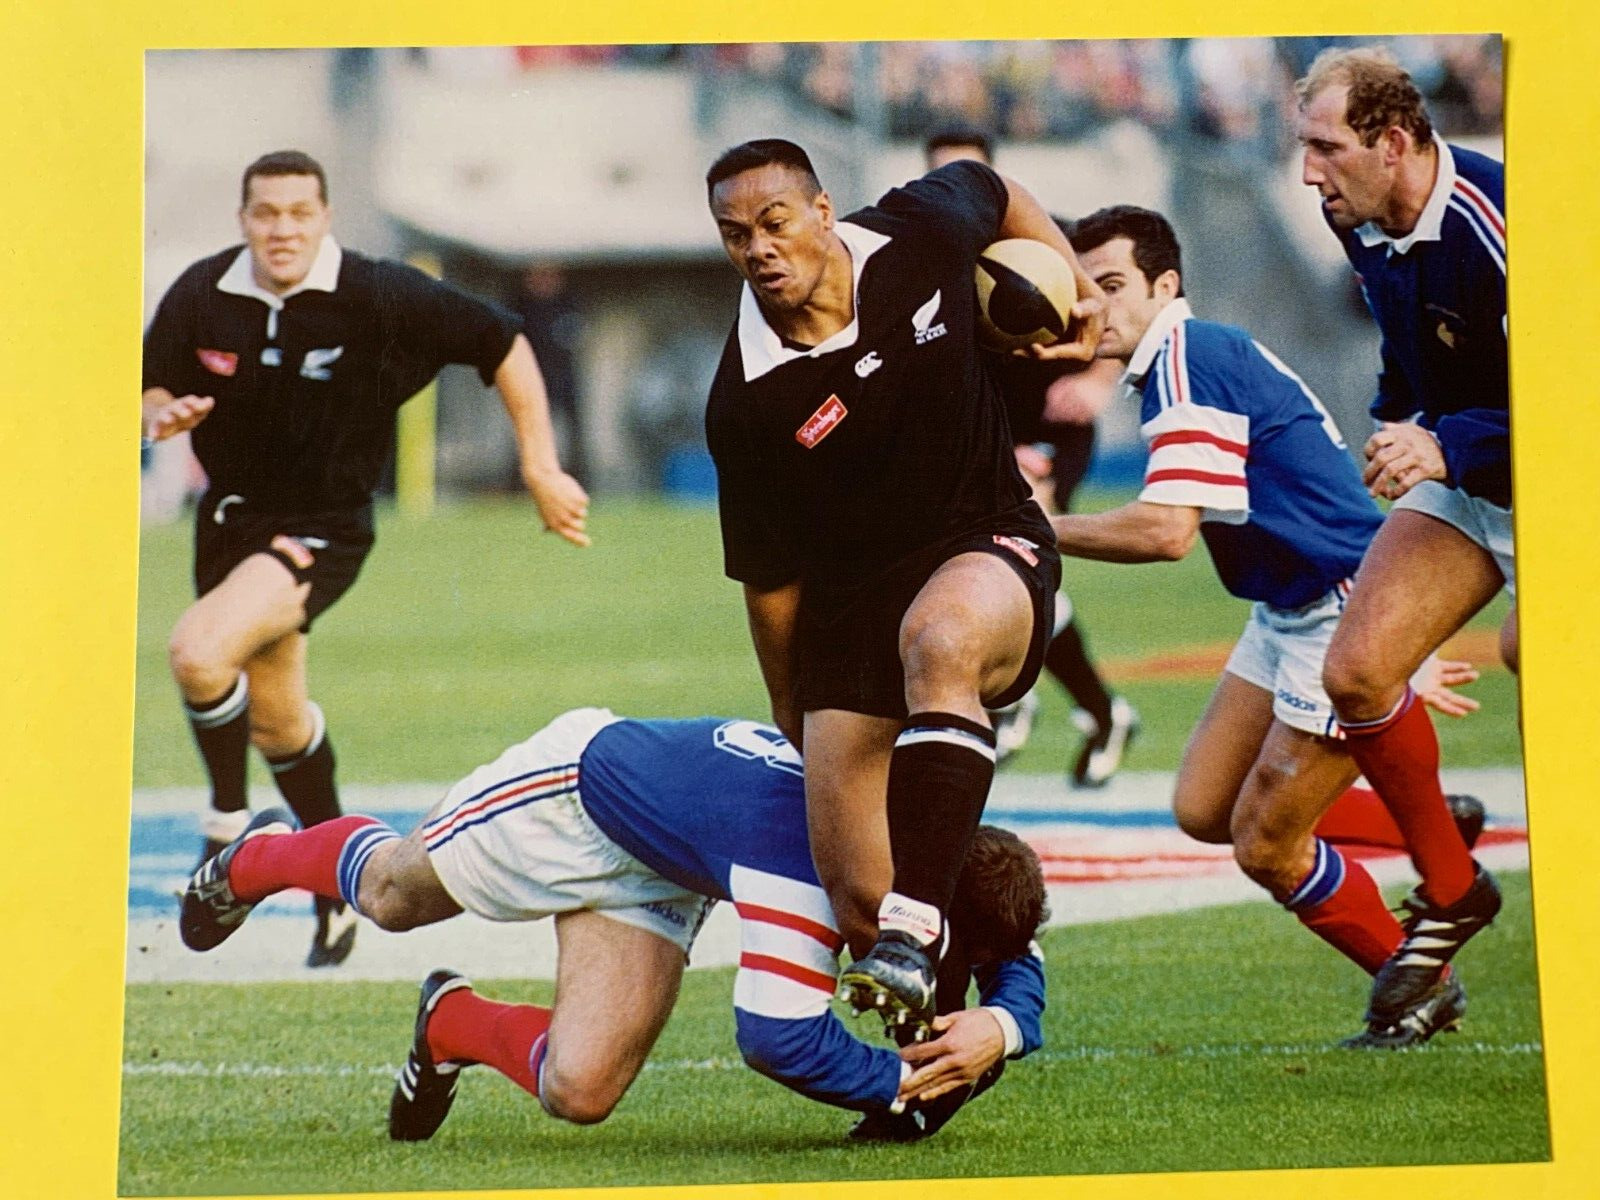 RUGBY UNION STAR ROOKIE CARD JONAH LOMU ALL BLACKS 1995 FRENCH EDITION